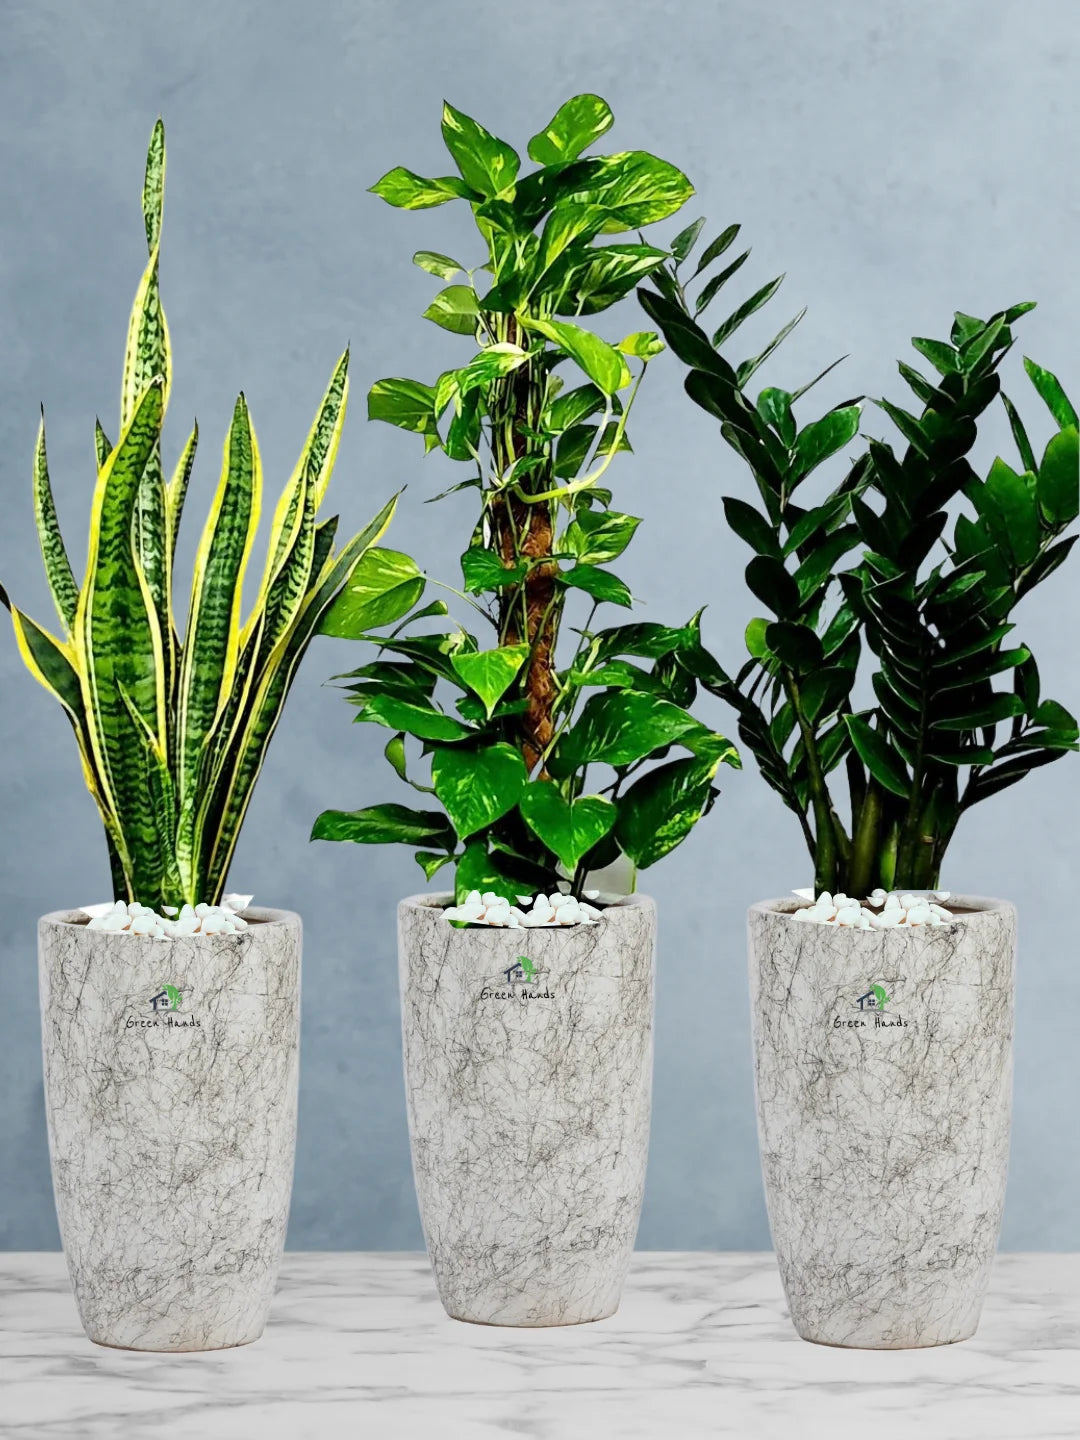 ZZ, Snake, and Money Plants | Low-Light Bundle | Perfect for Air Purification